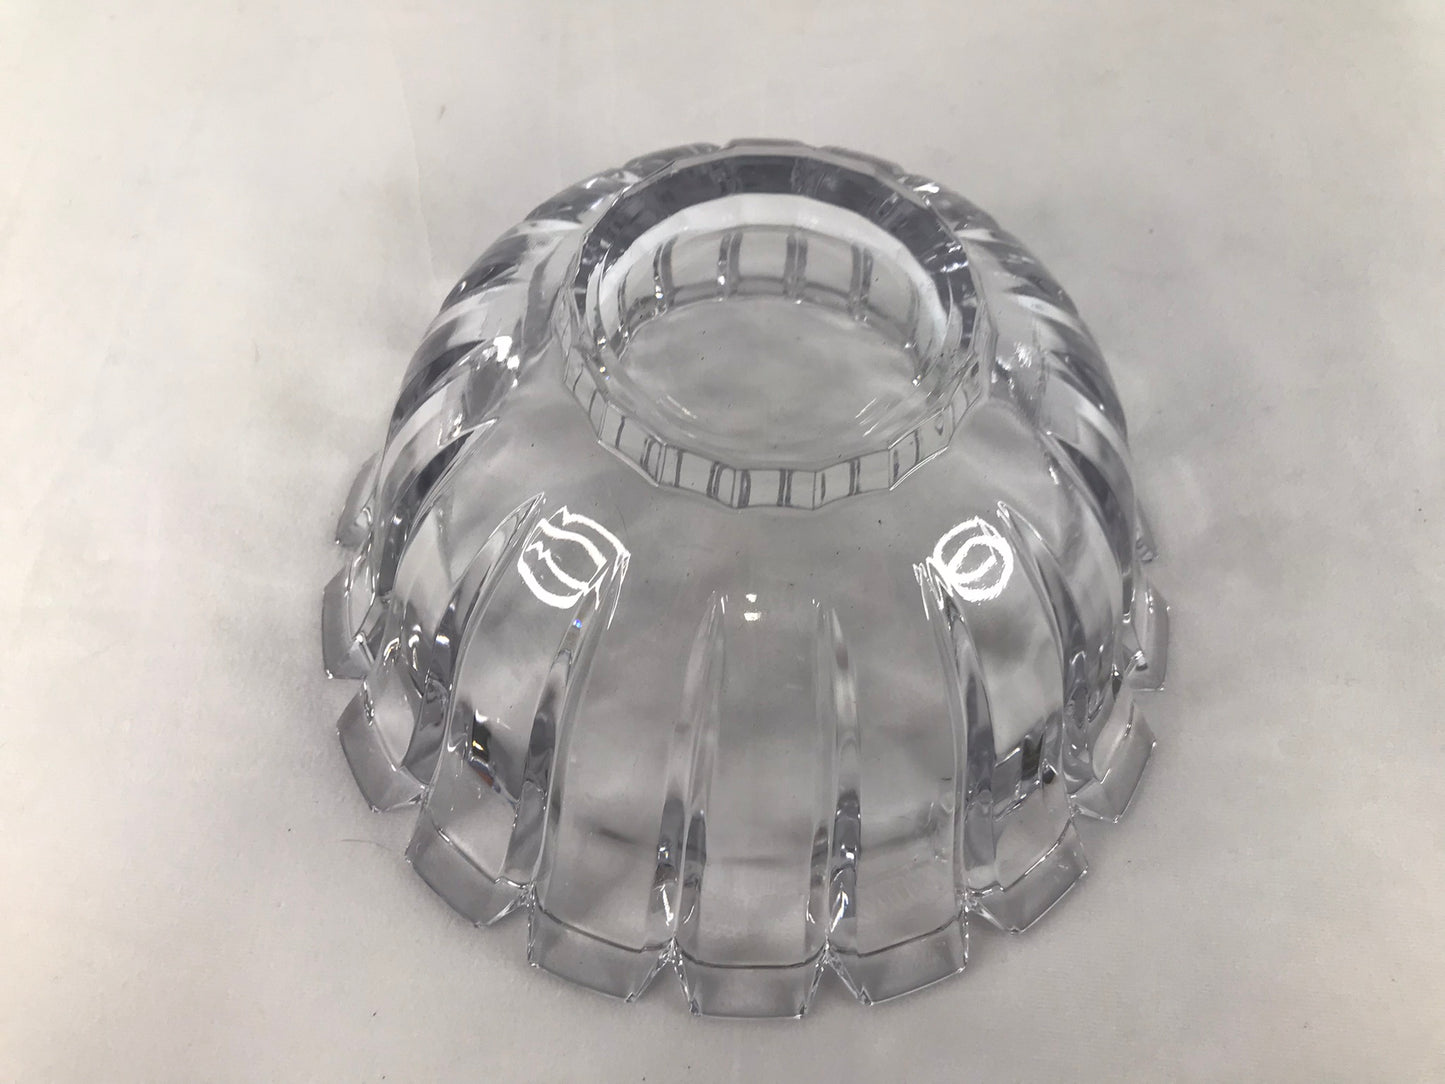 Home and Cottage Large Cut Glass Crystal Bowl Thick and Heavy 10 x 5 inch NEW Perfect